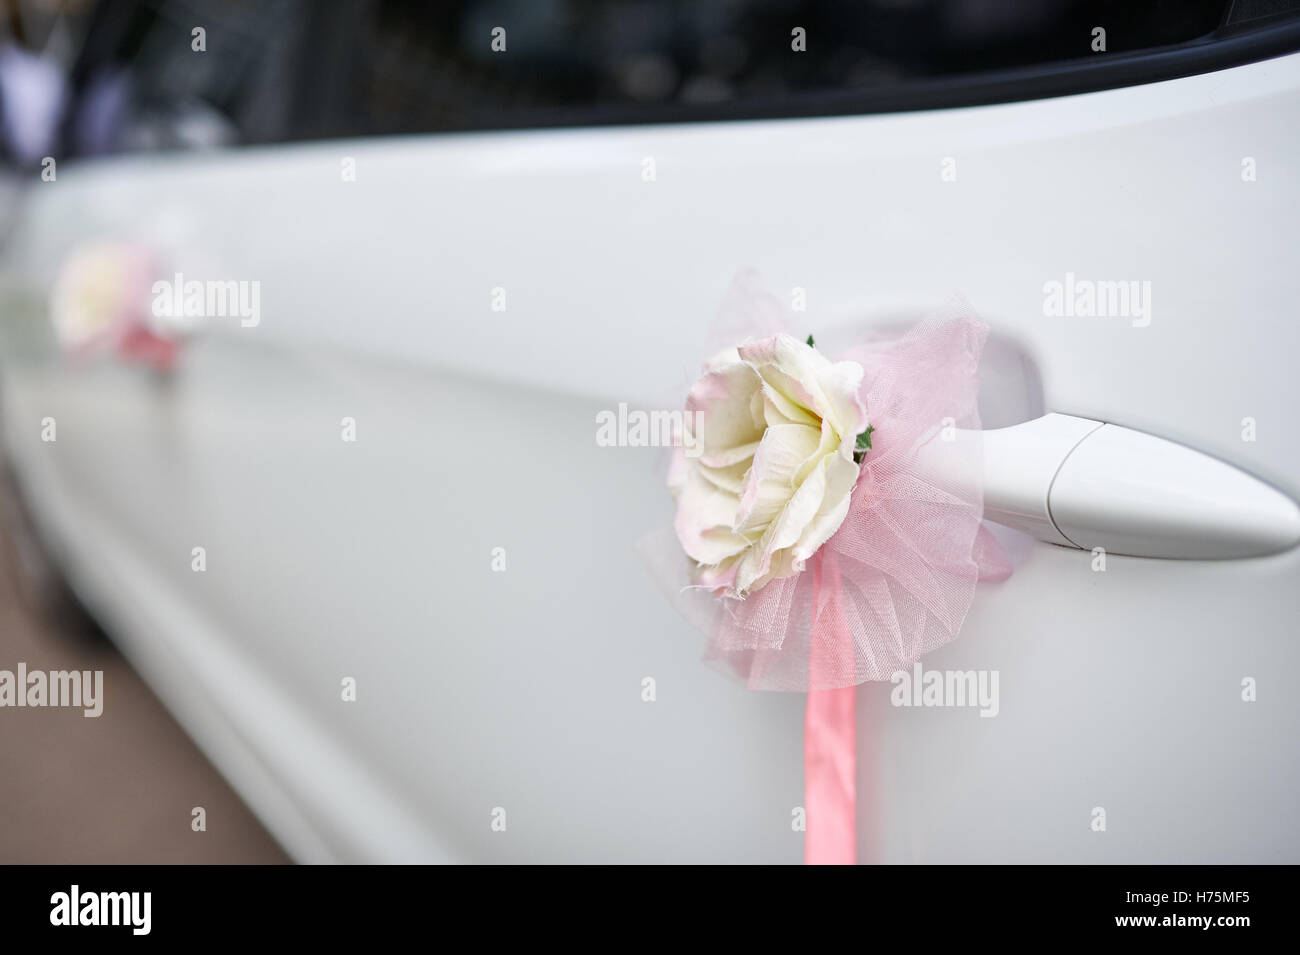 Wedding car with beautiful decorations of white roses Stock Photo